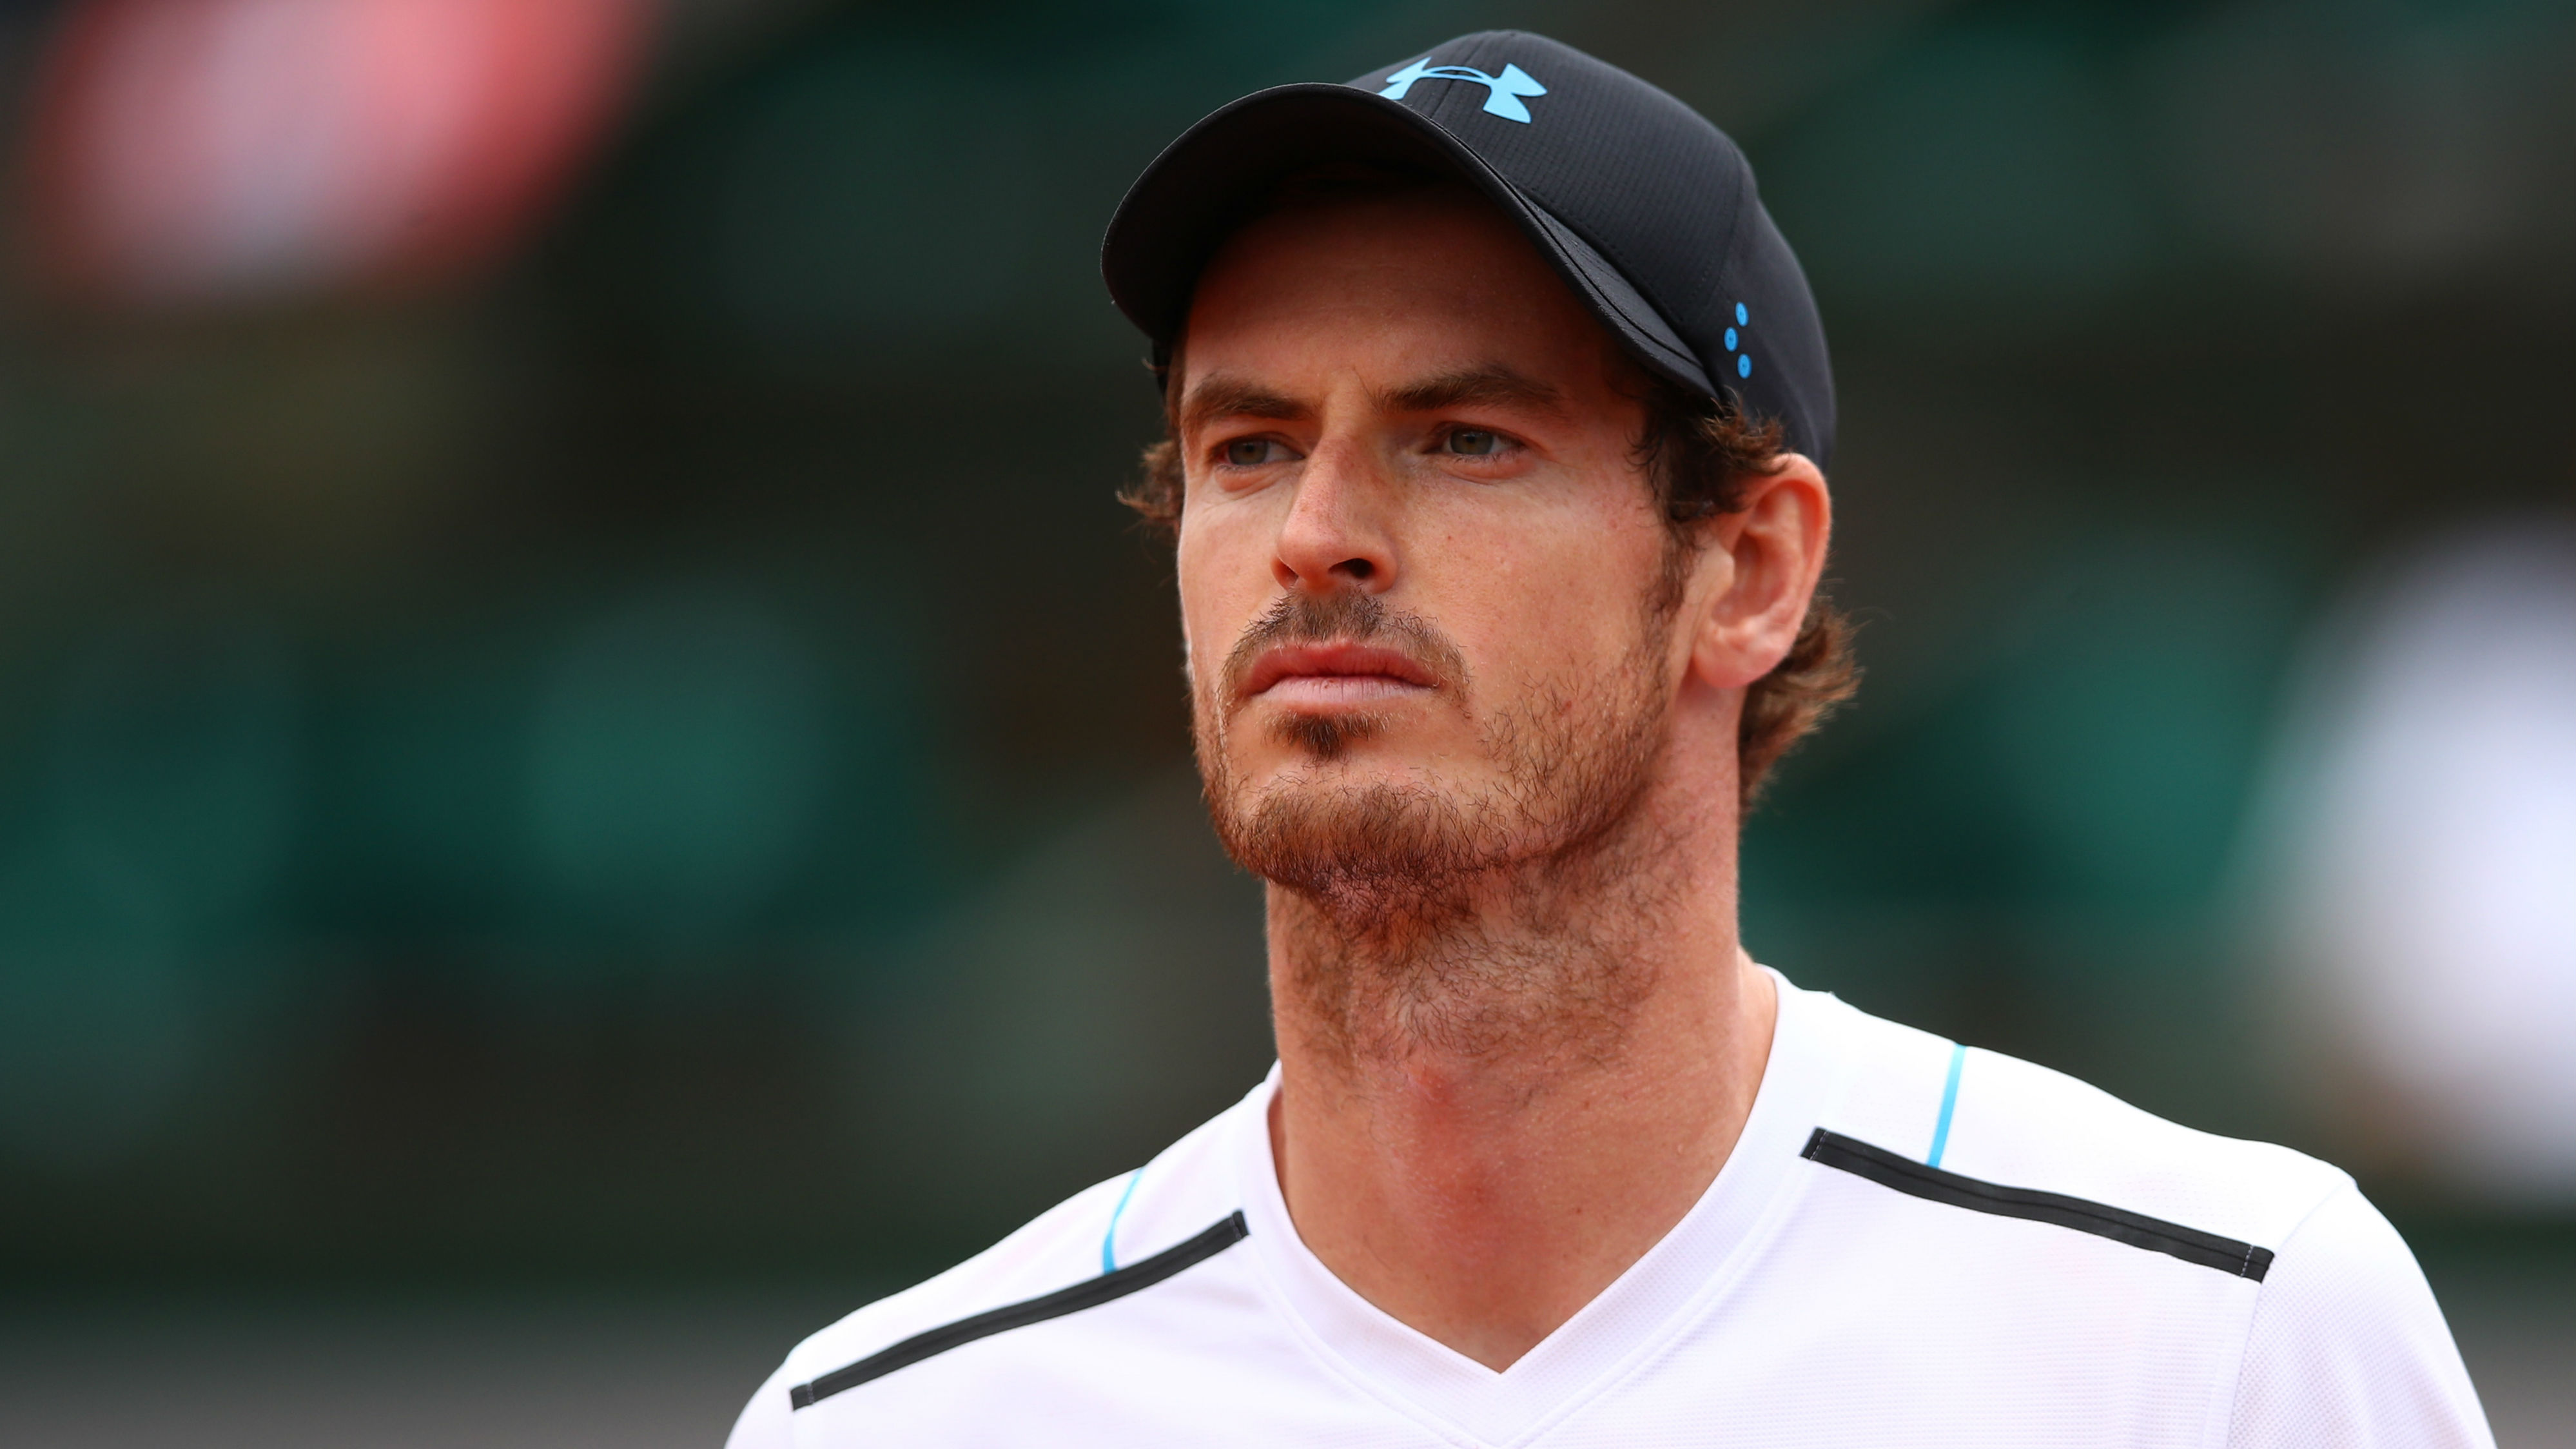 Andy Murray at the French Open